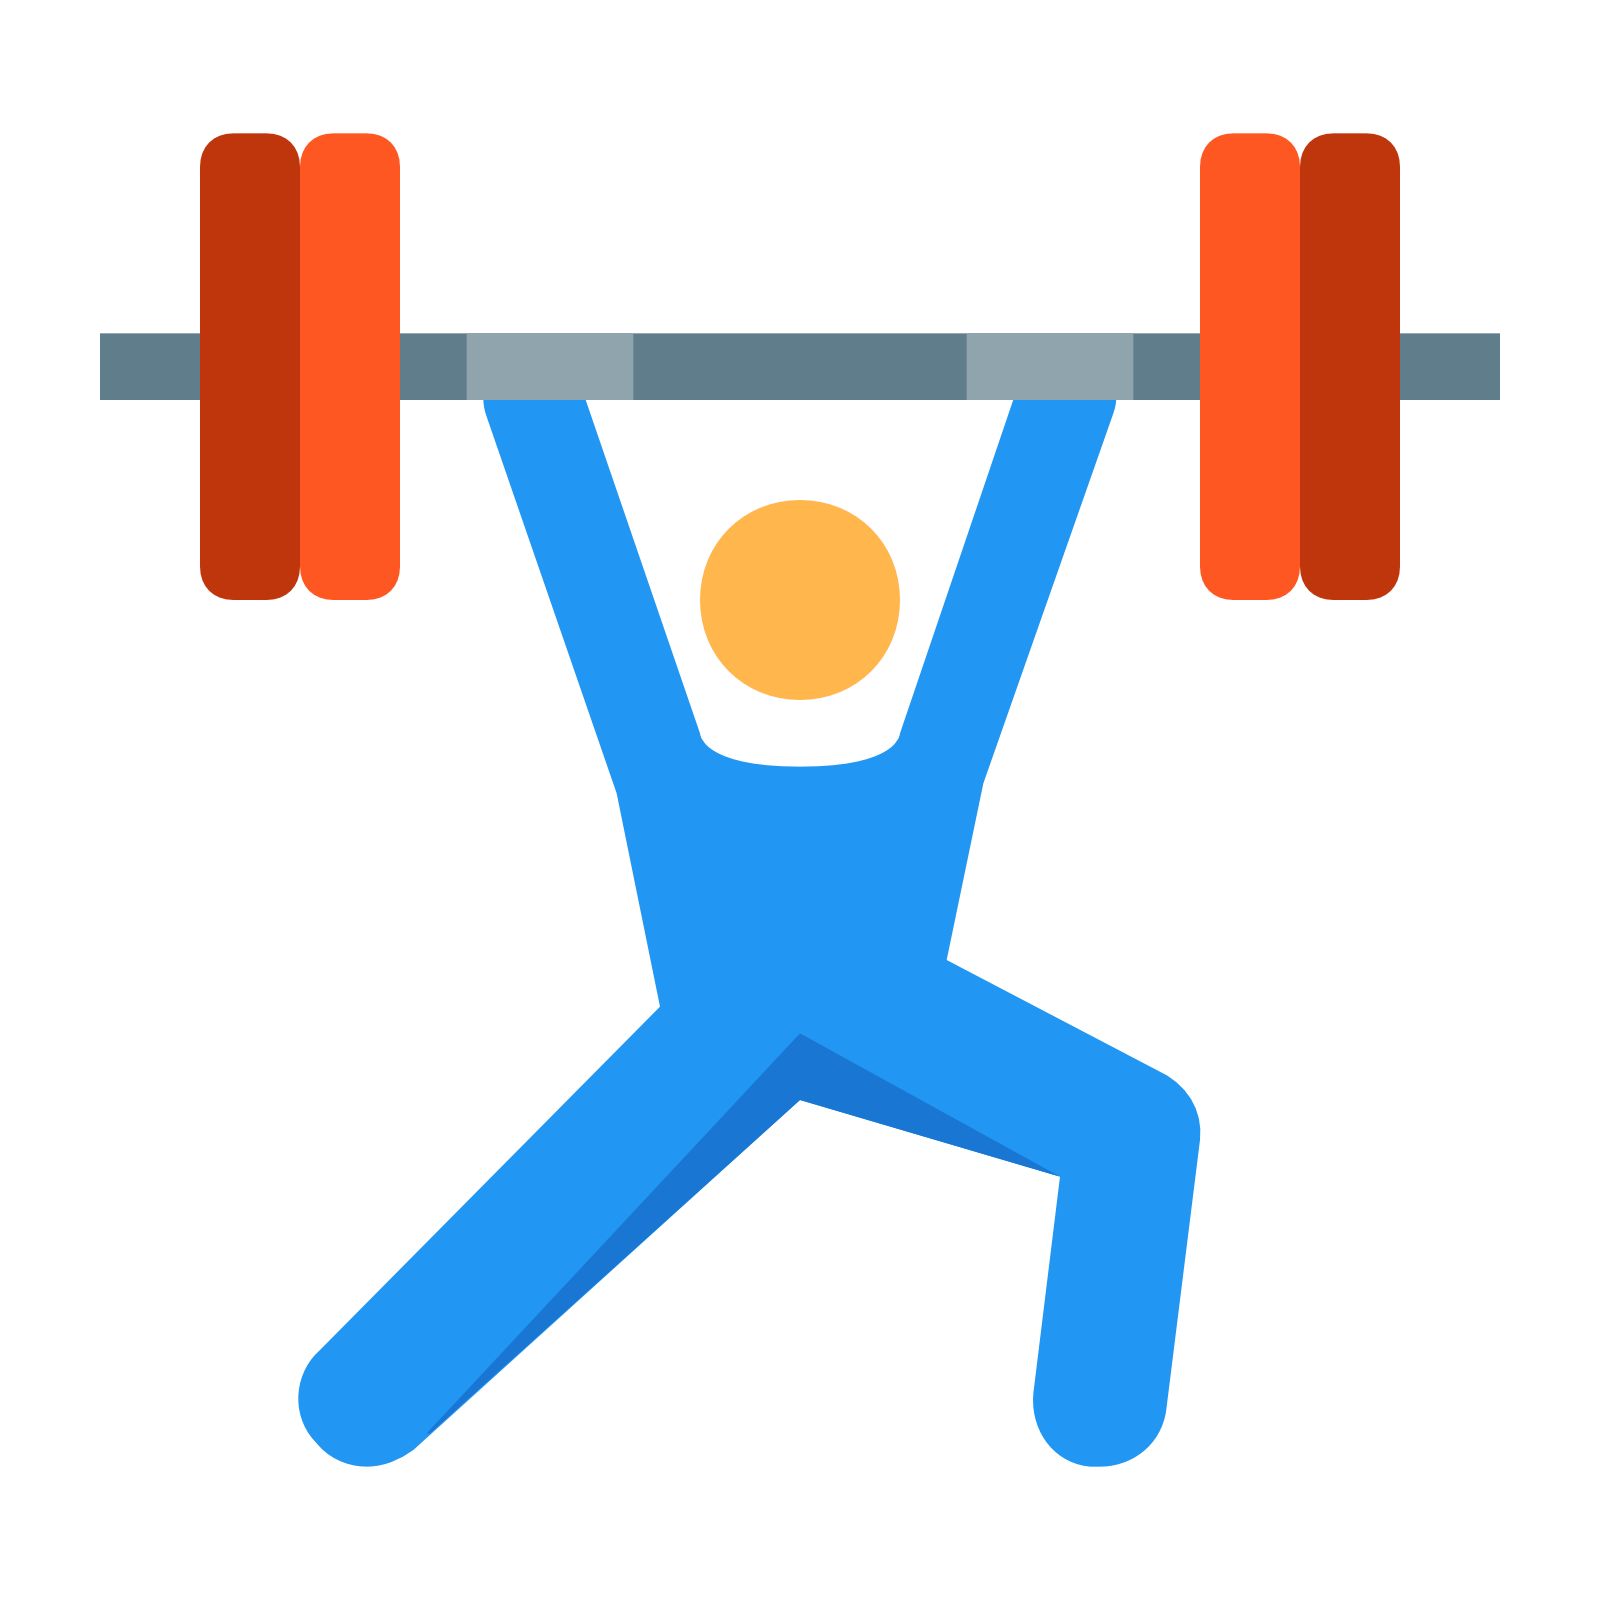 There Is A Human Figure Standing With Its Arms Extended Over Its Head And Its Legs. Png 50 Px - Weightlifting, Transparent background PNG HD thumbnail